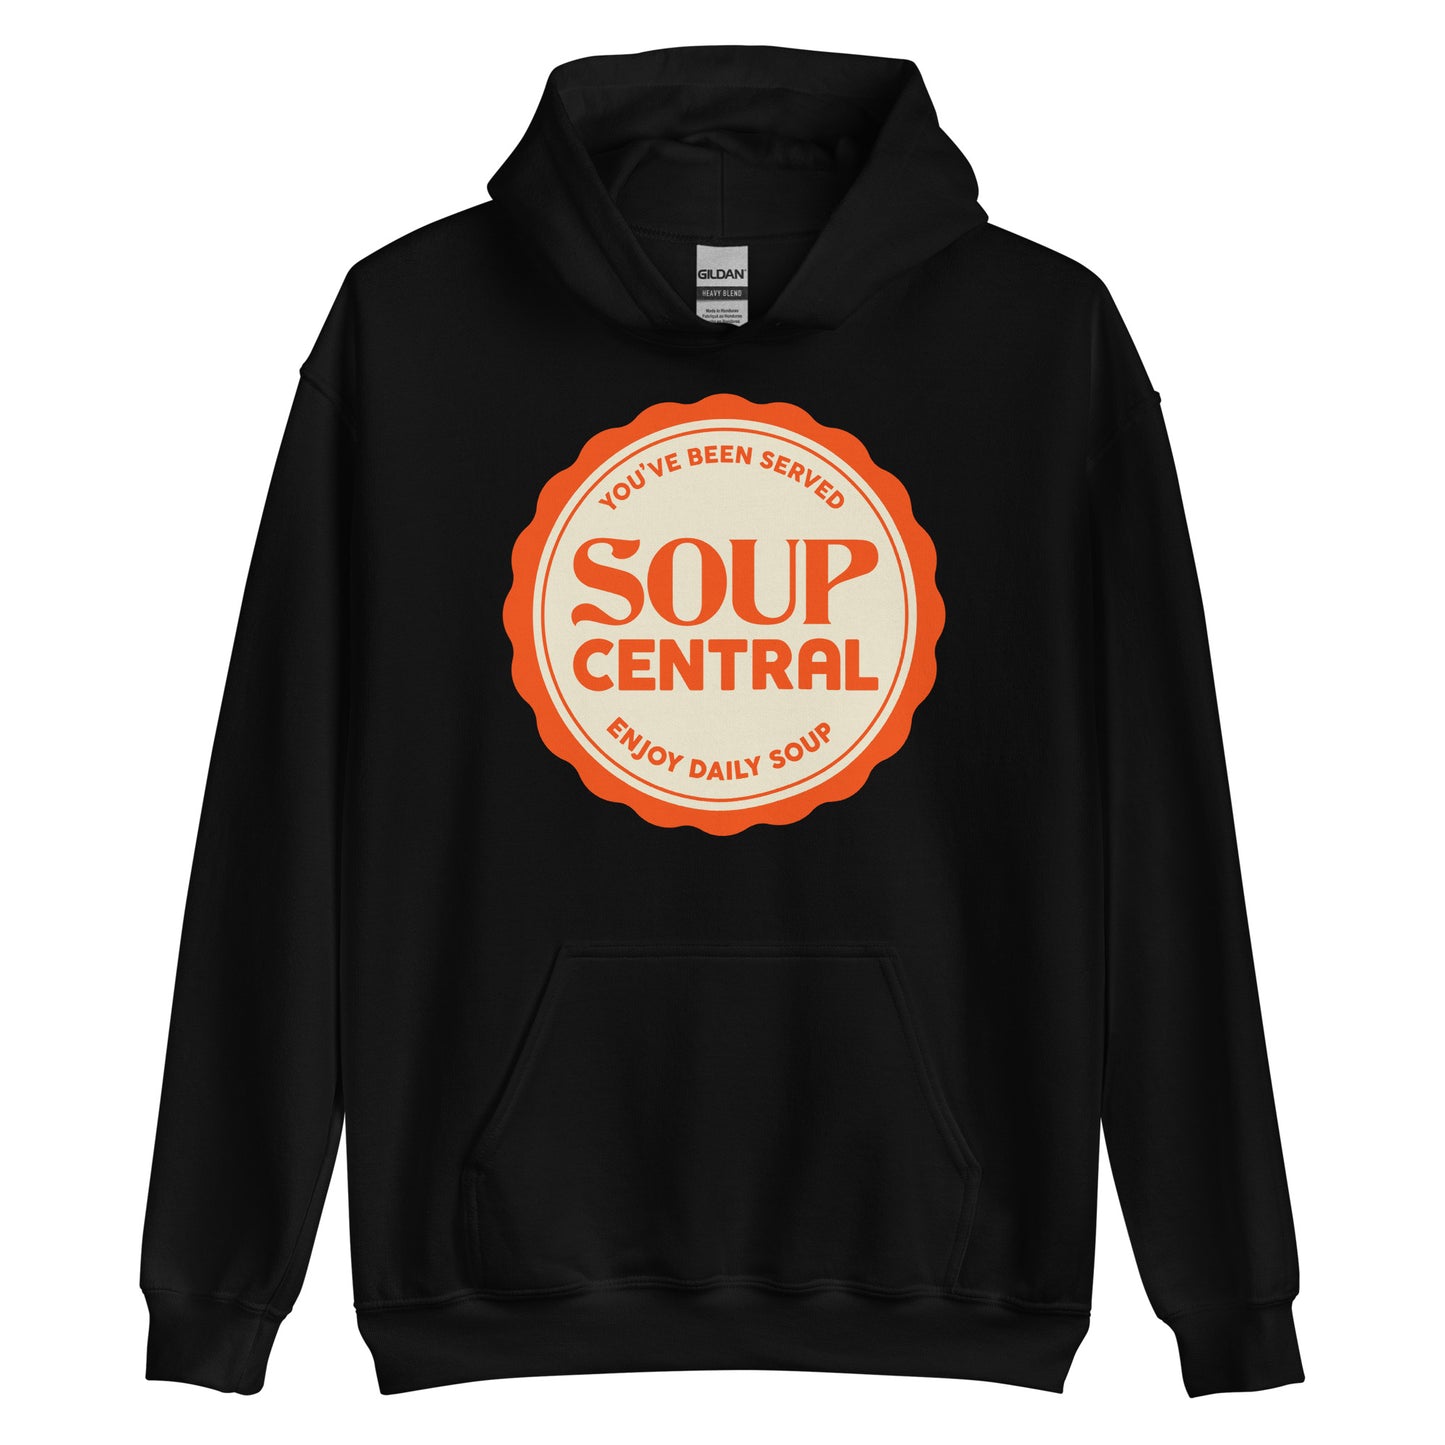 NAFO x Soup Central Enjoy Daily Soup Hoodie